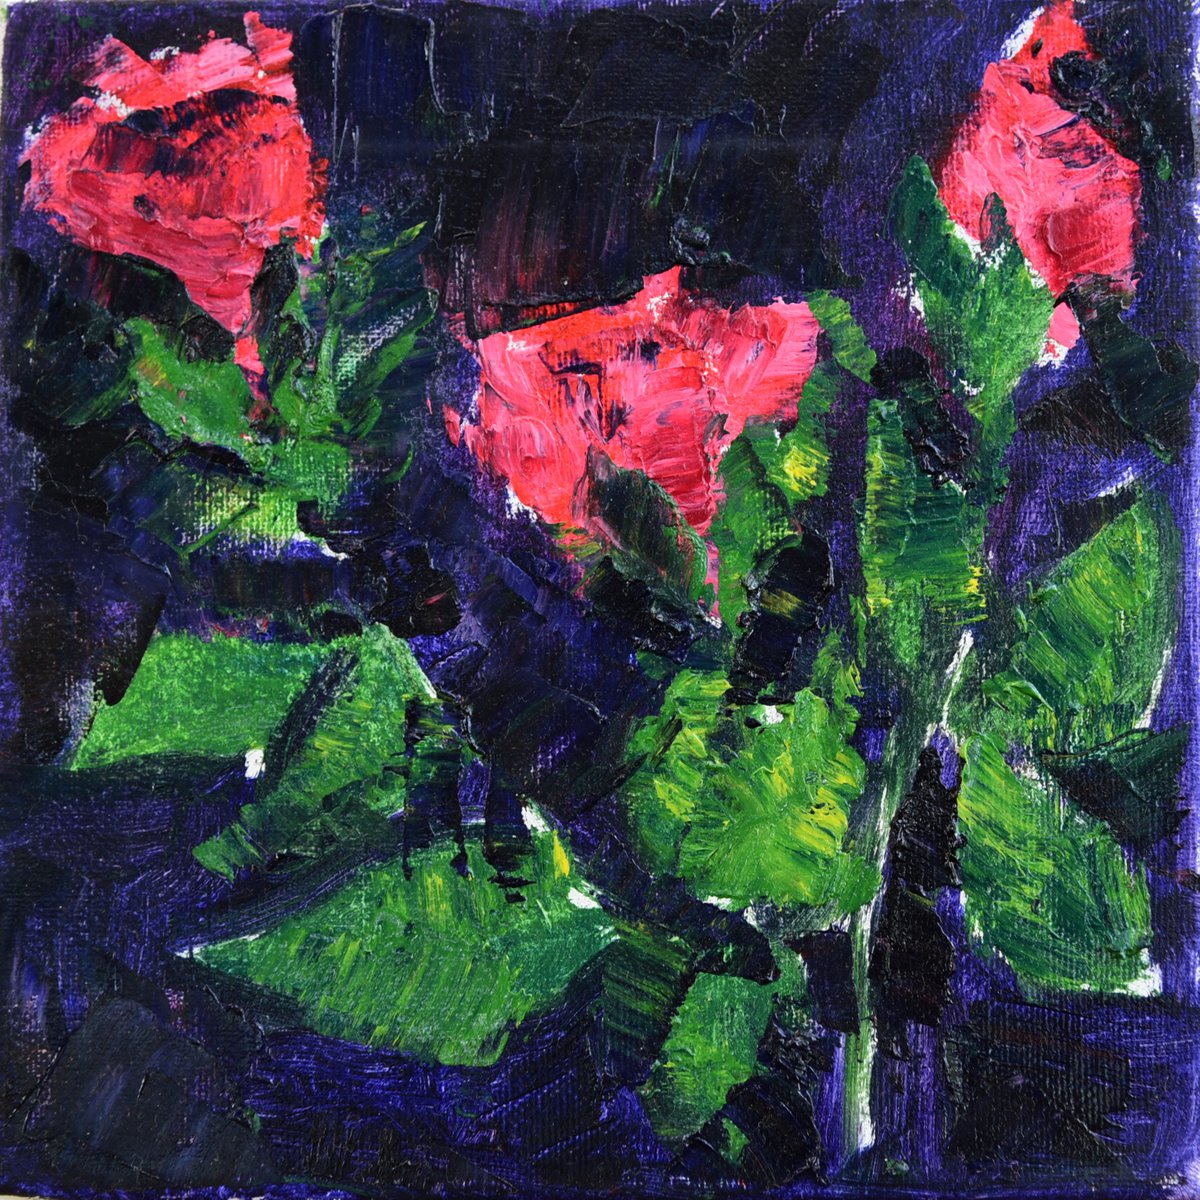 Small red roses by Elena Zapassky